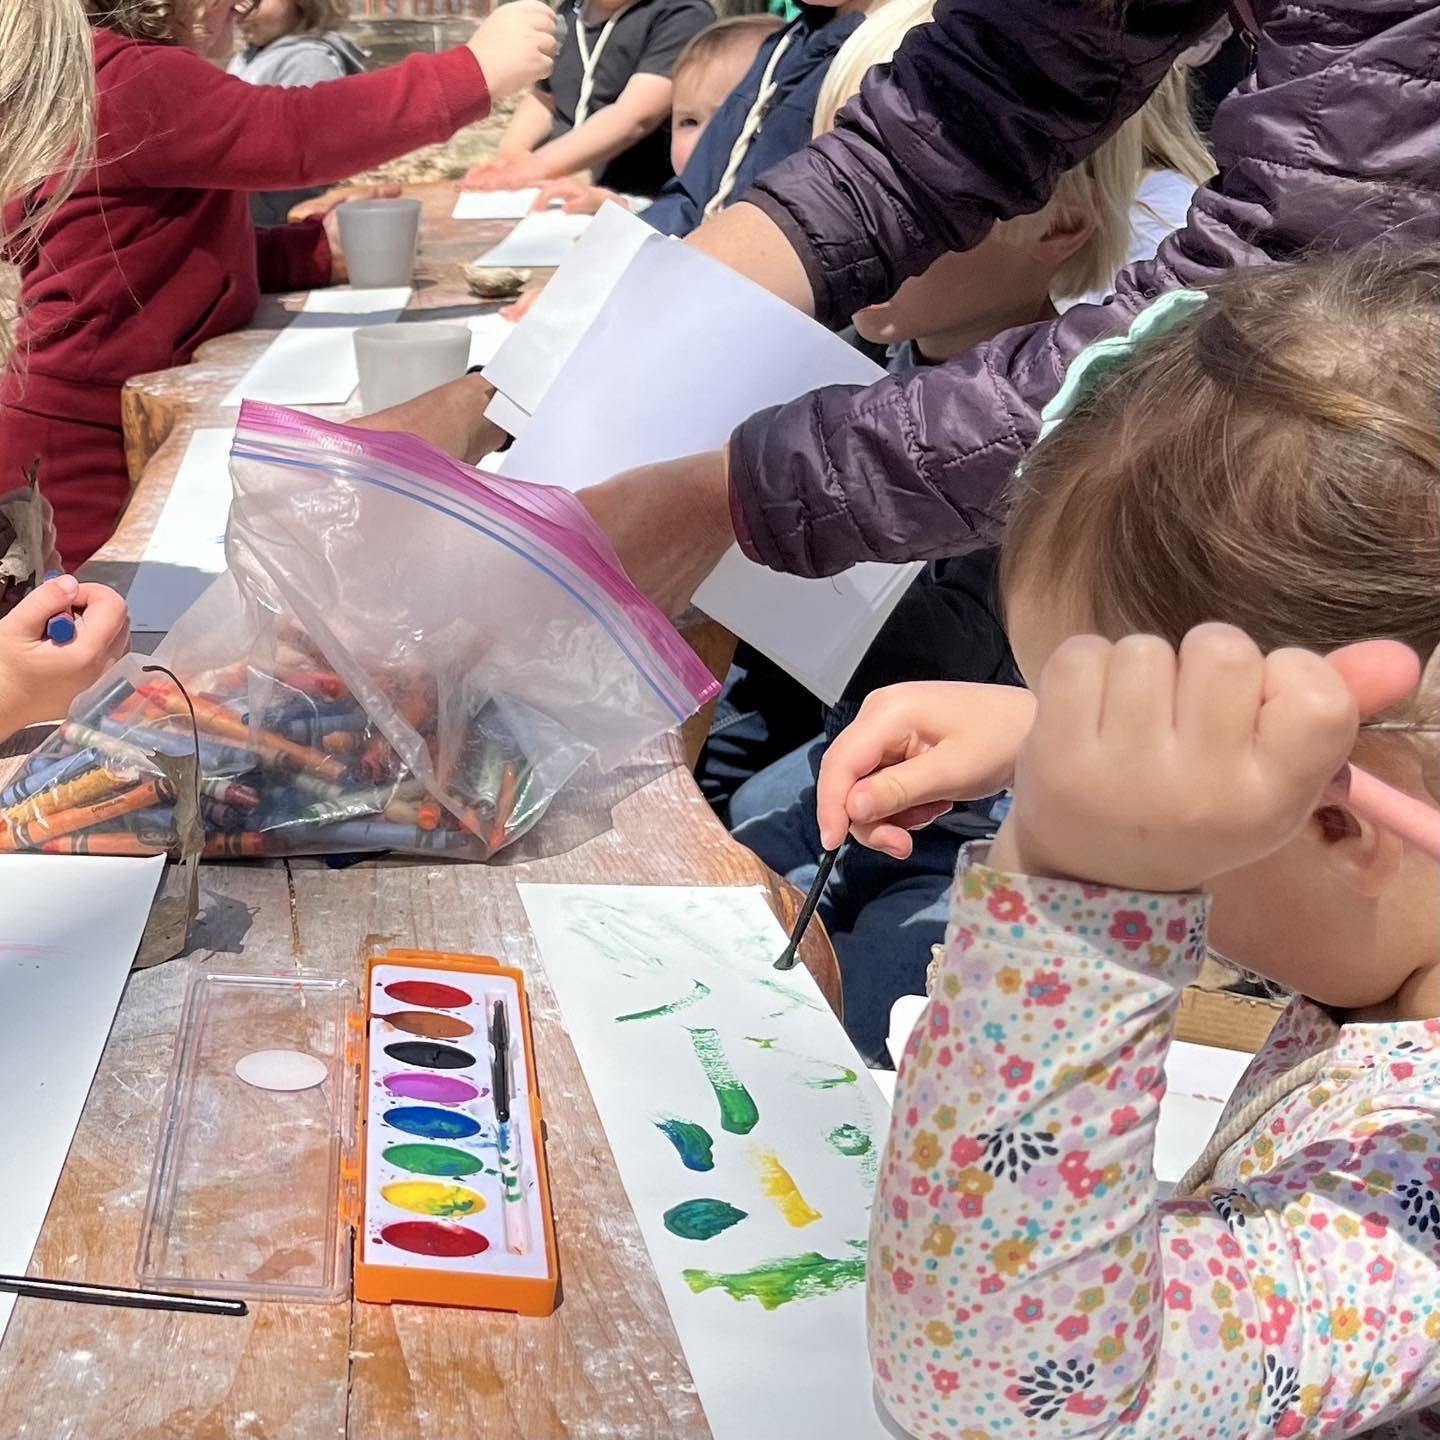 There are a few spots left for the adult/kid creative workshop tomorrow evening at @enjoythepursuit! Doing creative practices with littles can be such a sweet space of connection, delight, and fun. So looking forward to sharing space tomorrow! #liefd